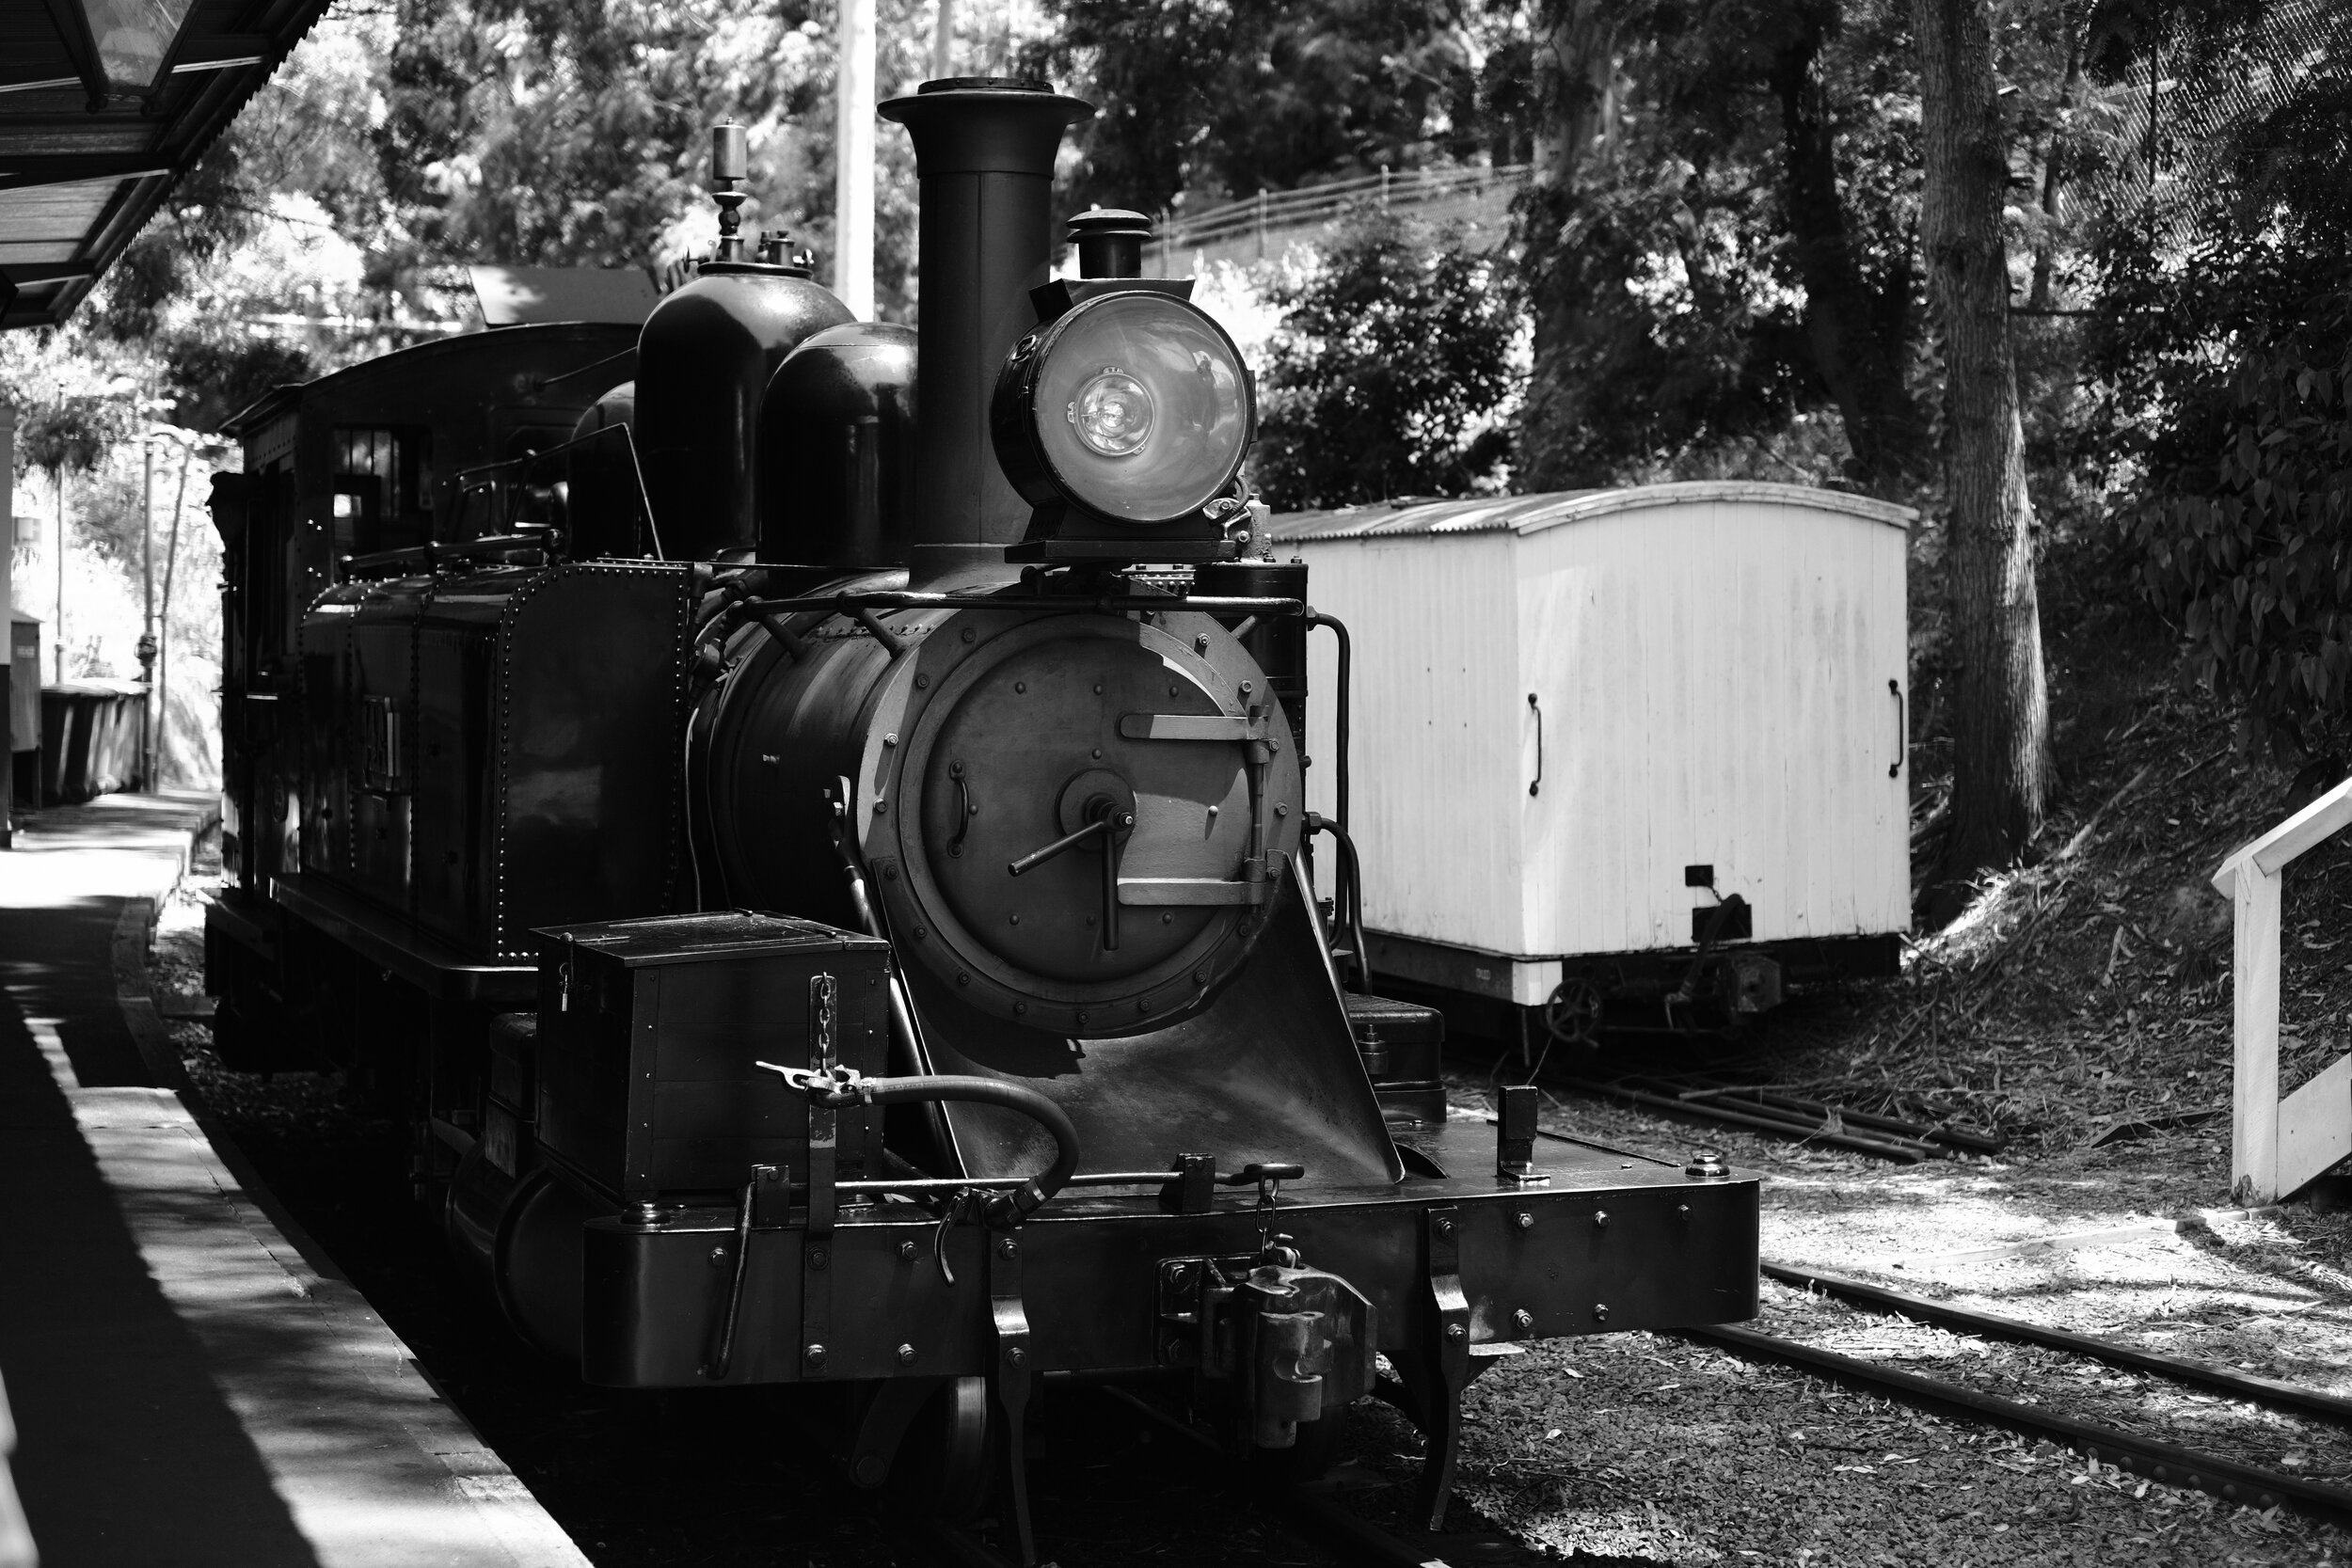 Puffing Billy, Dandenong, Victoria